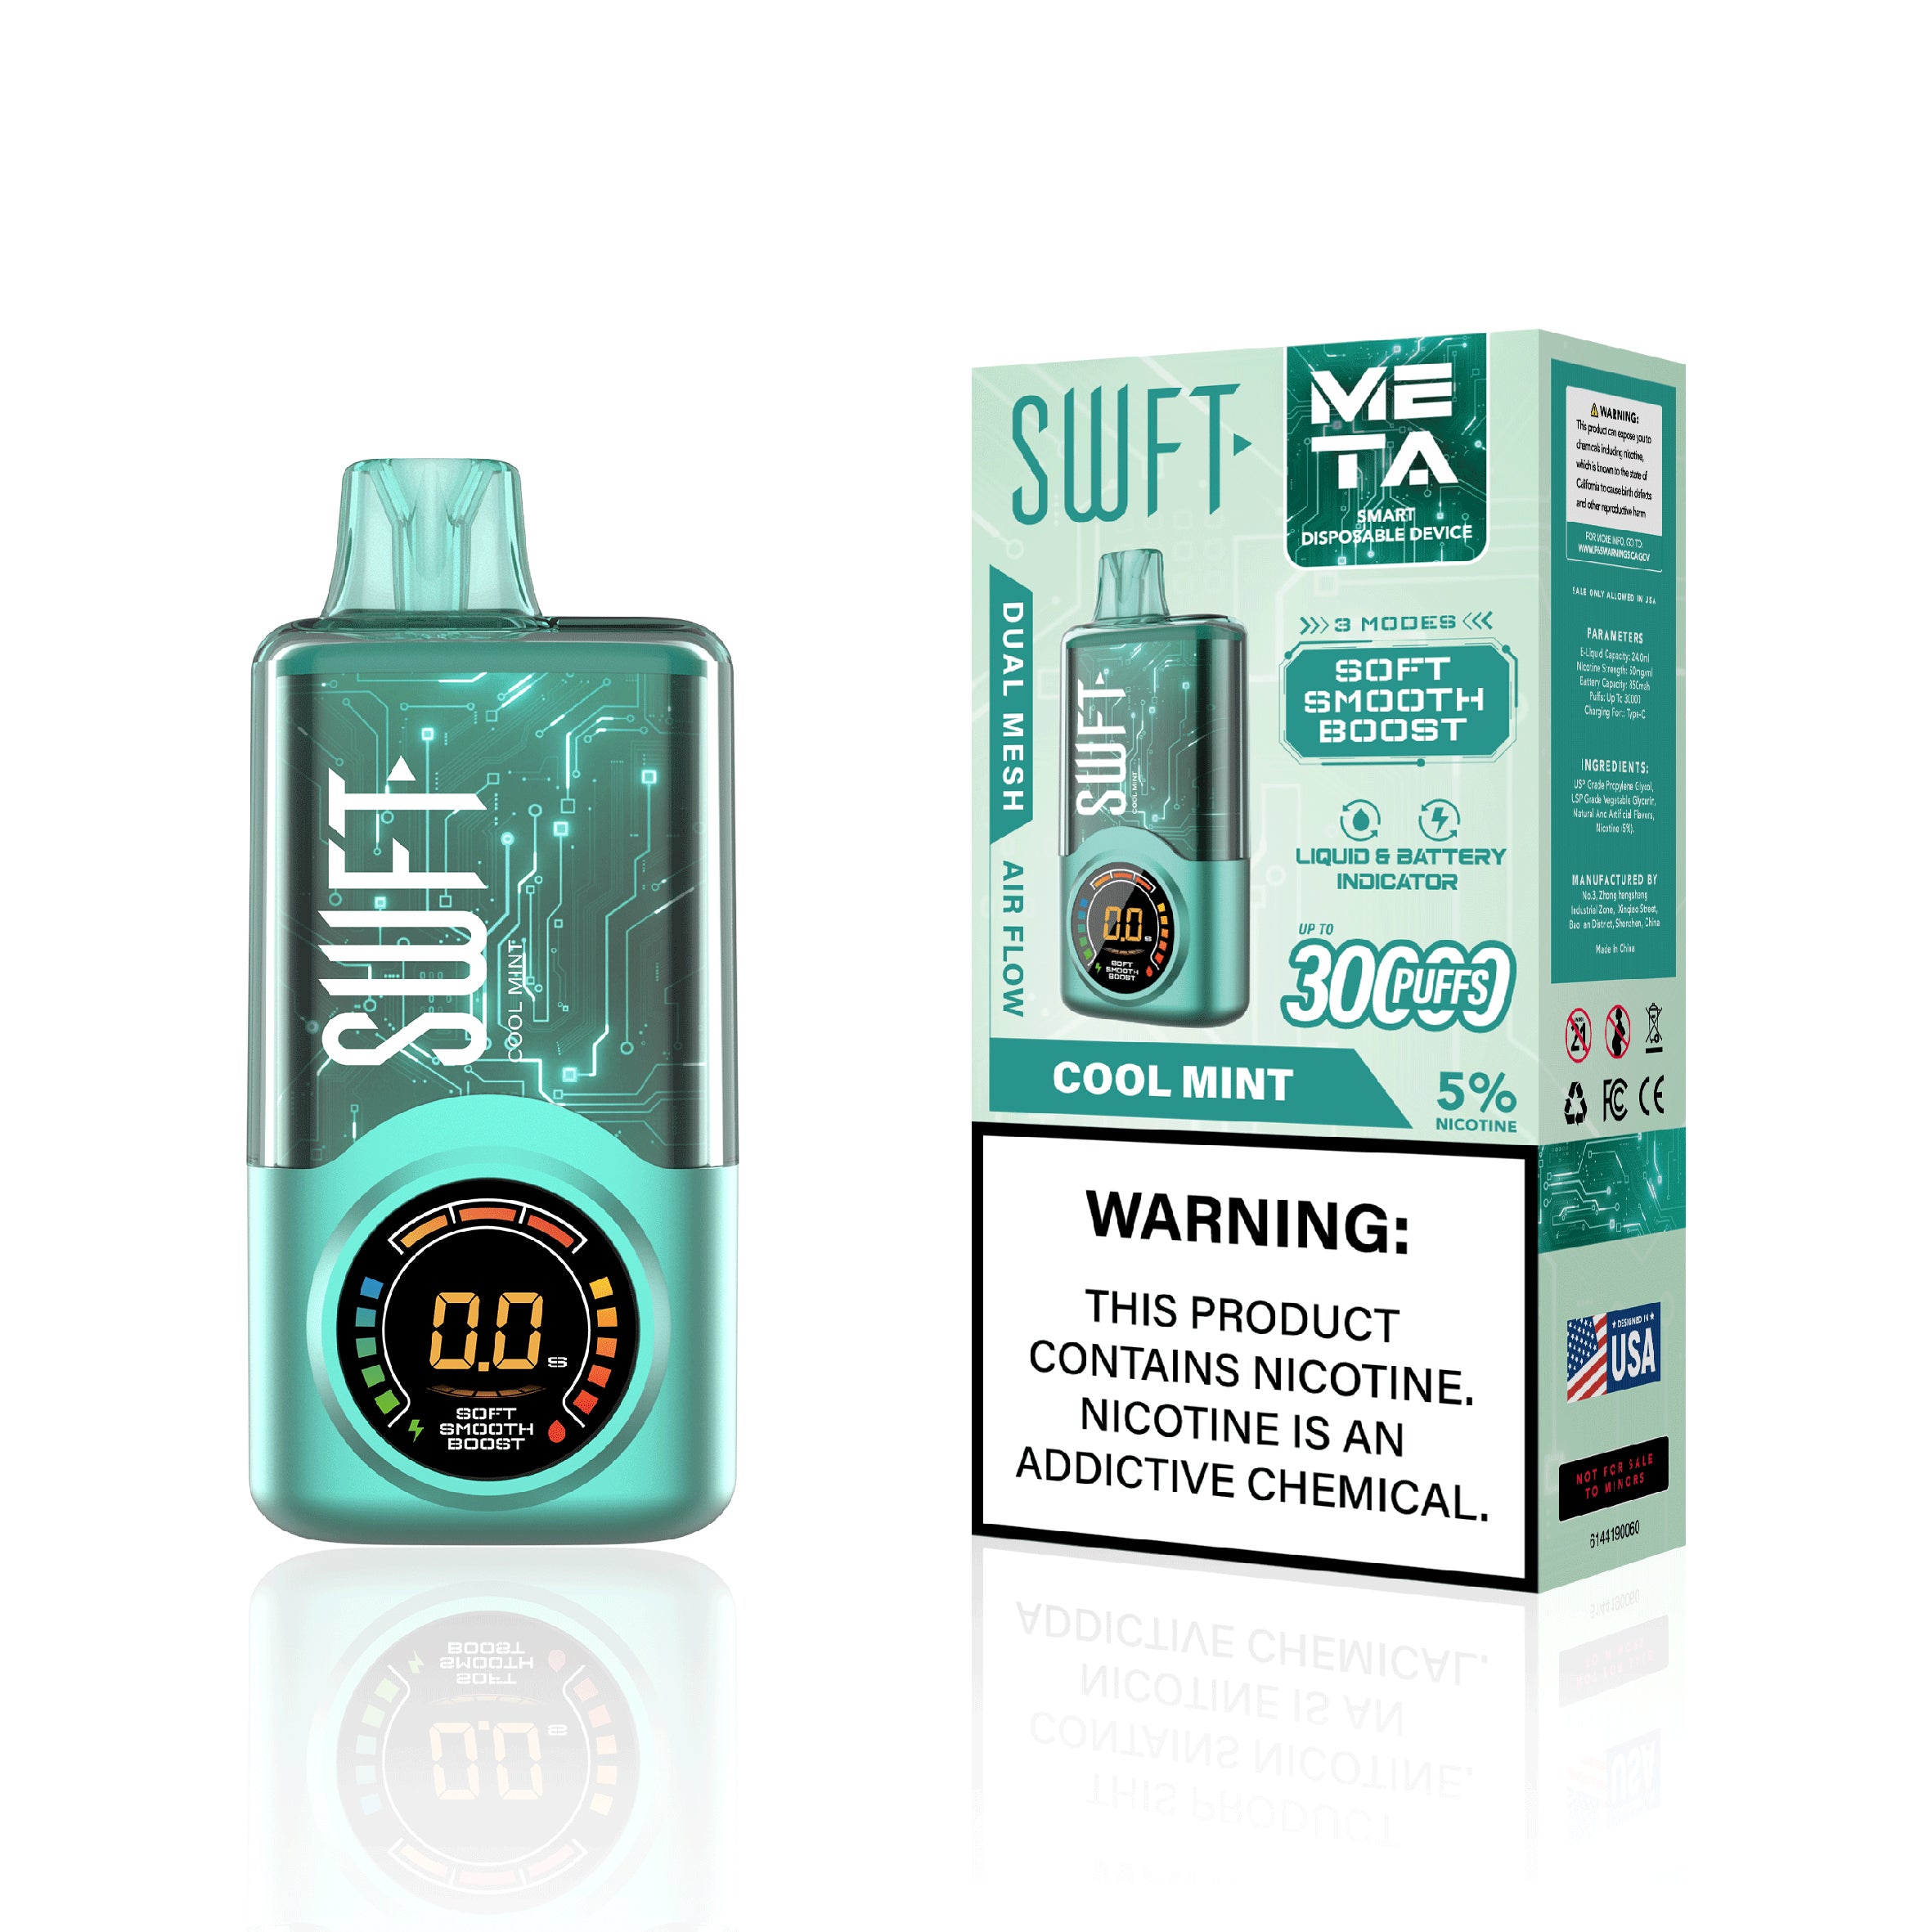 SWFT META 30000 PUFFS ADJUSTABLE WATTAGE DISPOSABLE VAPE DEVICE DUAL MESH COIL LIQUID AND BATTERY INDICATOR COOL MINT